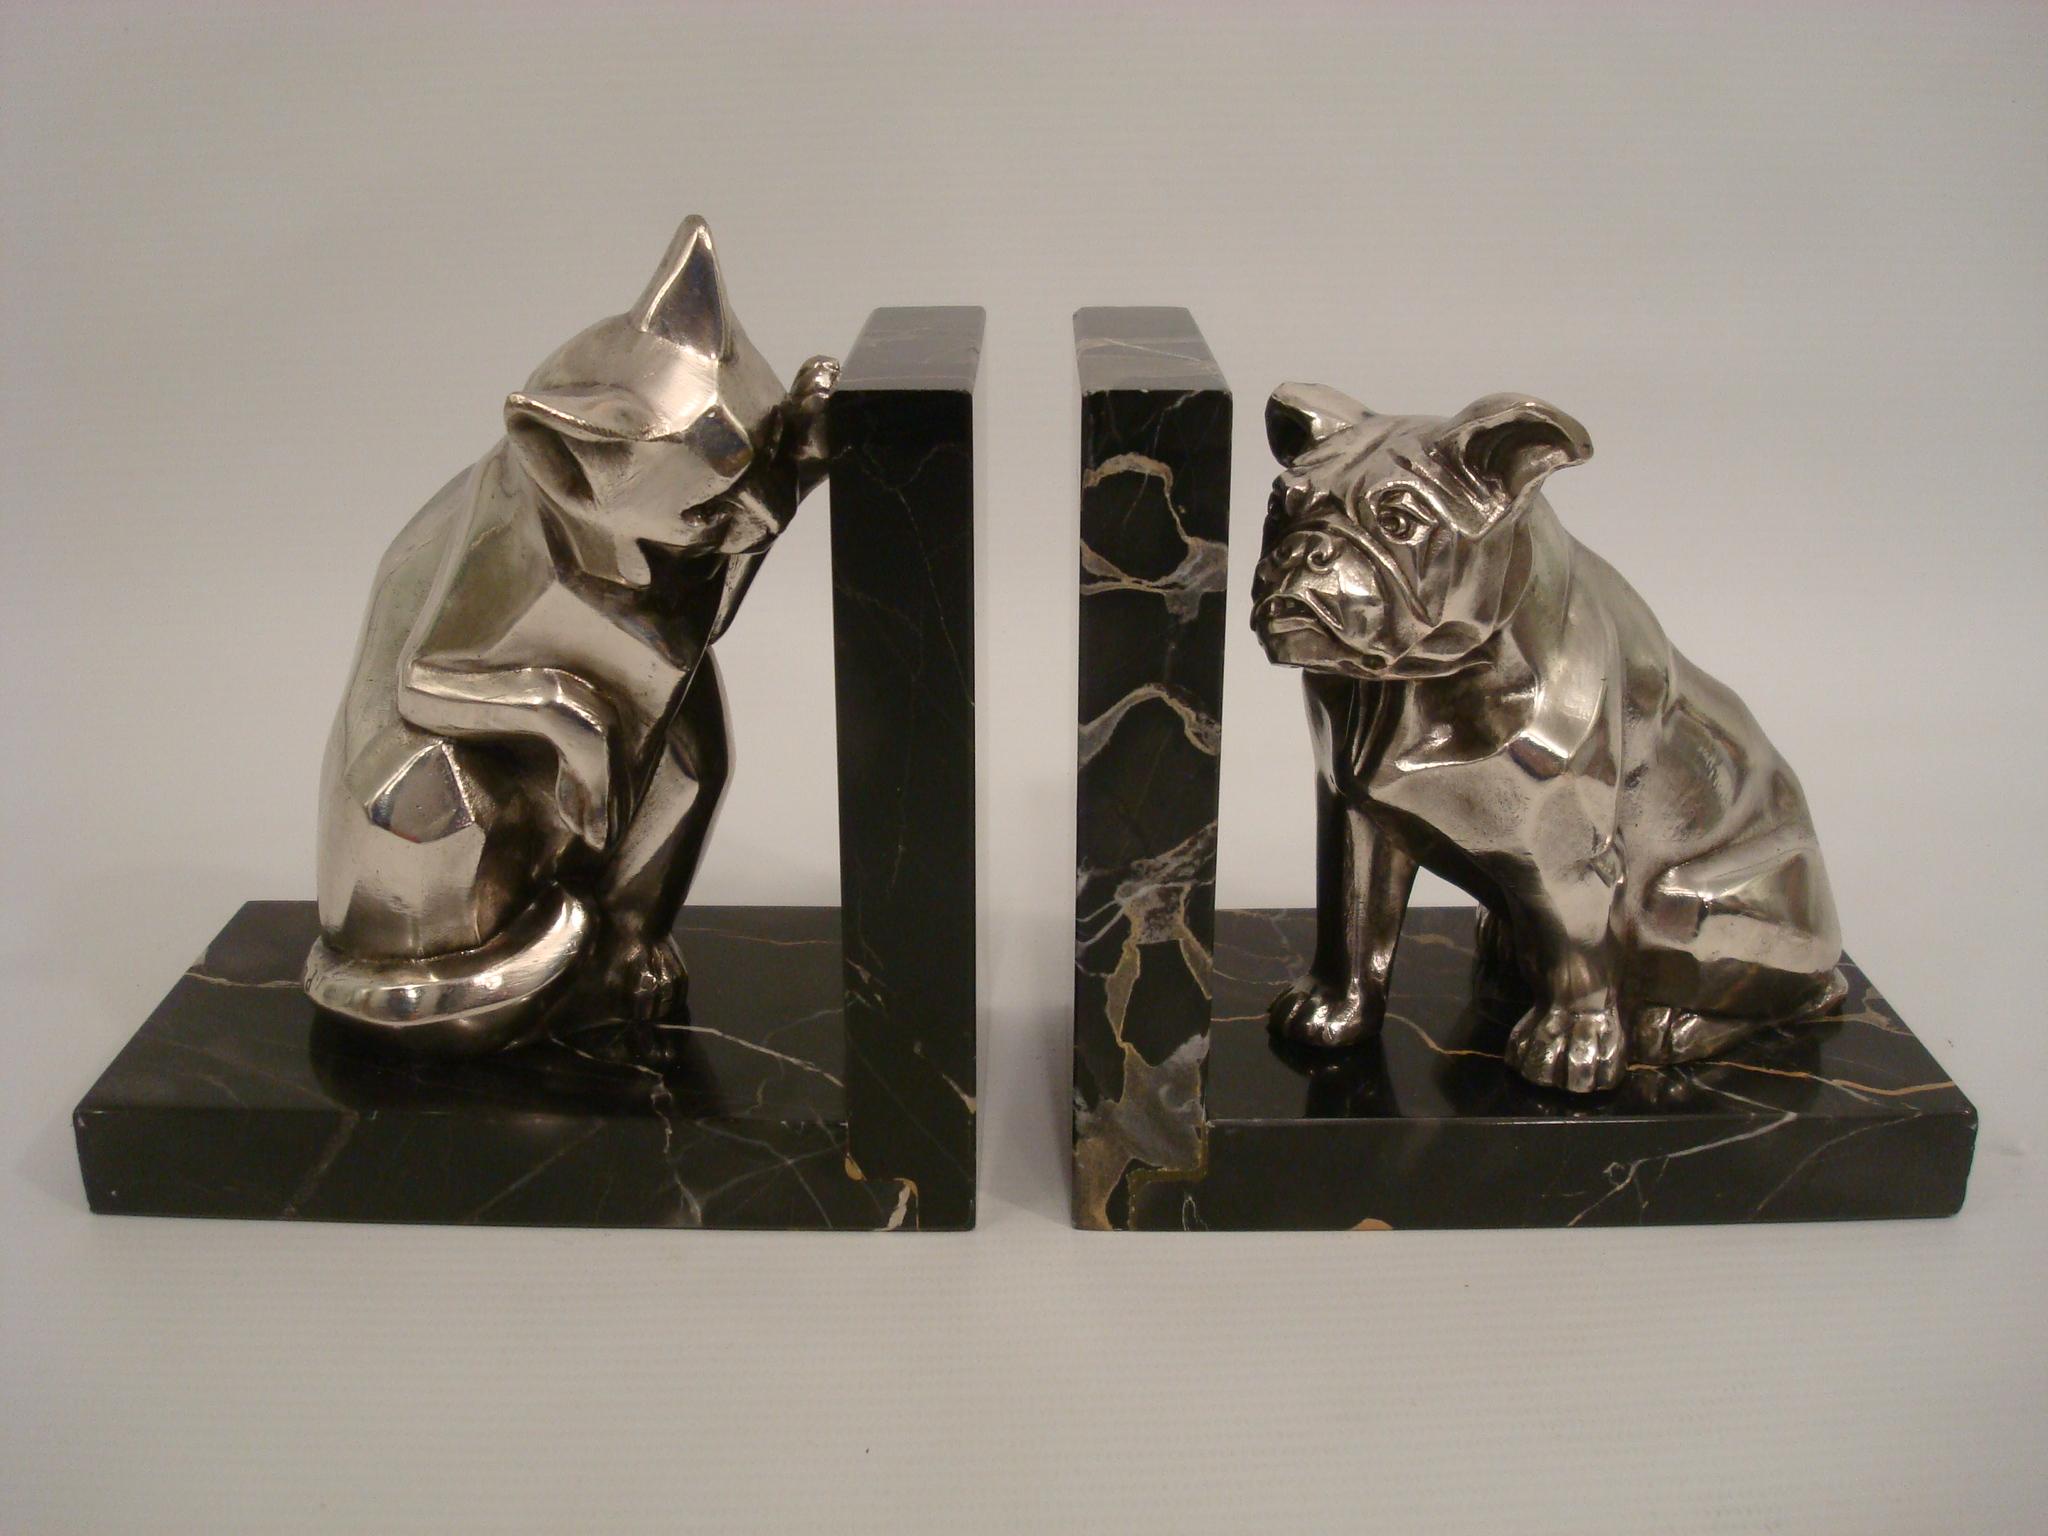 Description: Art Deco metal bookends with cat and bulldog.
Artist / Maker: Irénée Rochard.
Signature / Marks: Rochard.
Style: Art Deco.
Date: 1930.
Material: Metal with silver patina. Portoro marble base.
Origin: France.
Size of one:
H 13.2 cm. x L